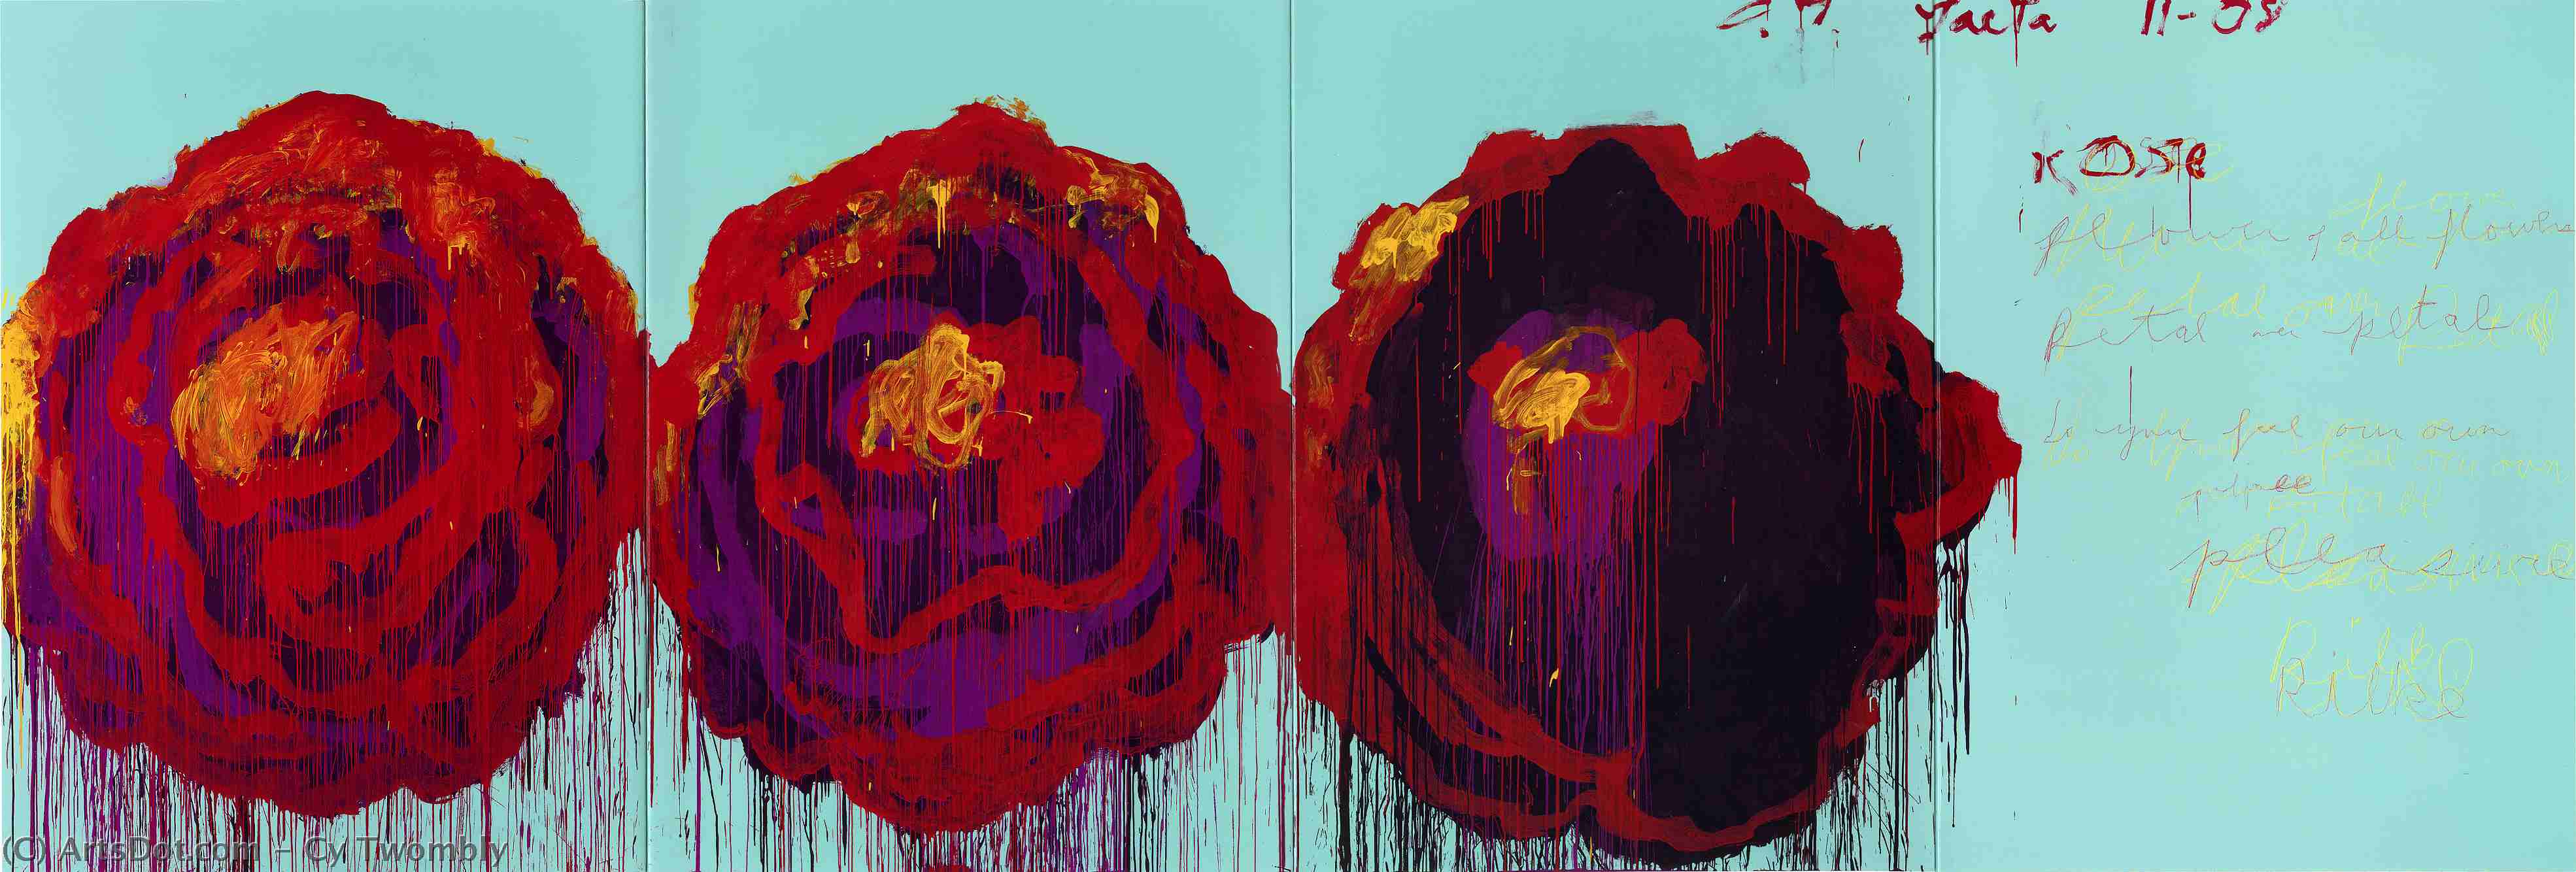 WikiOO.org - 백과 사전 - 회화, 삽화 Cy Twombly - The Rose (IV)